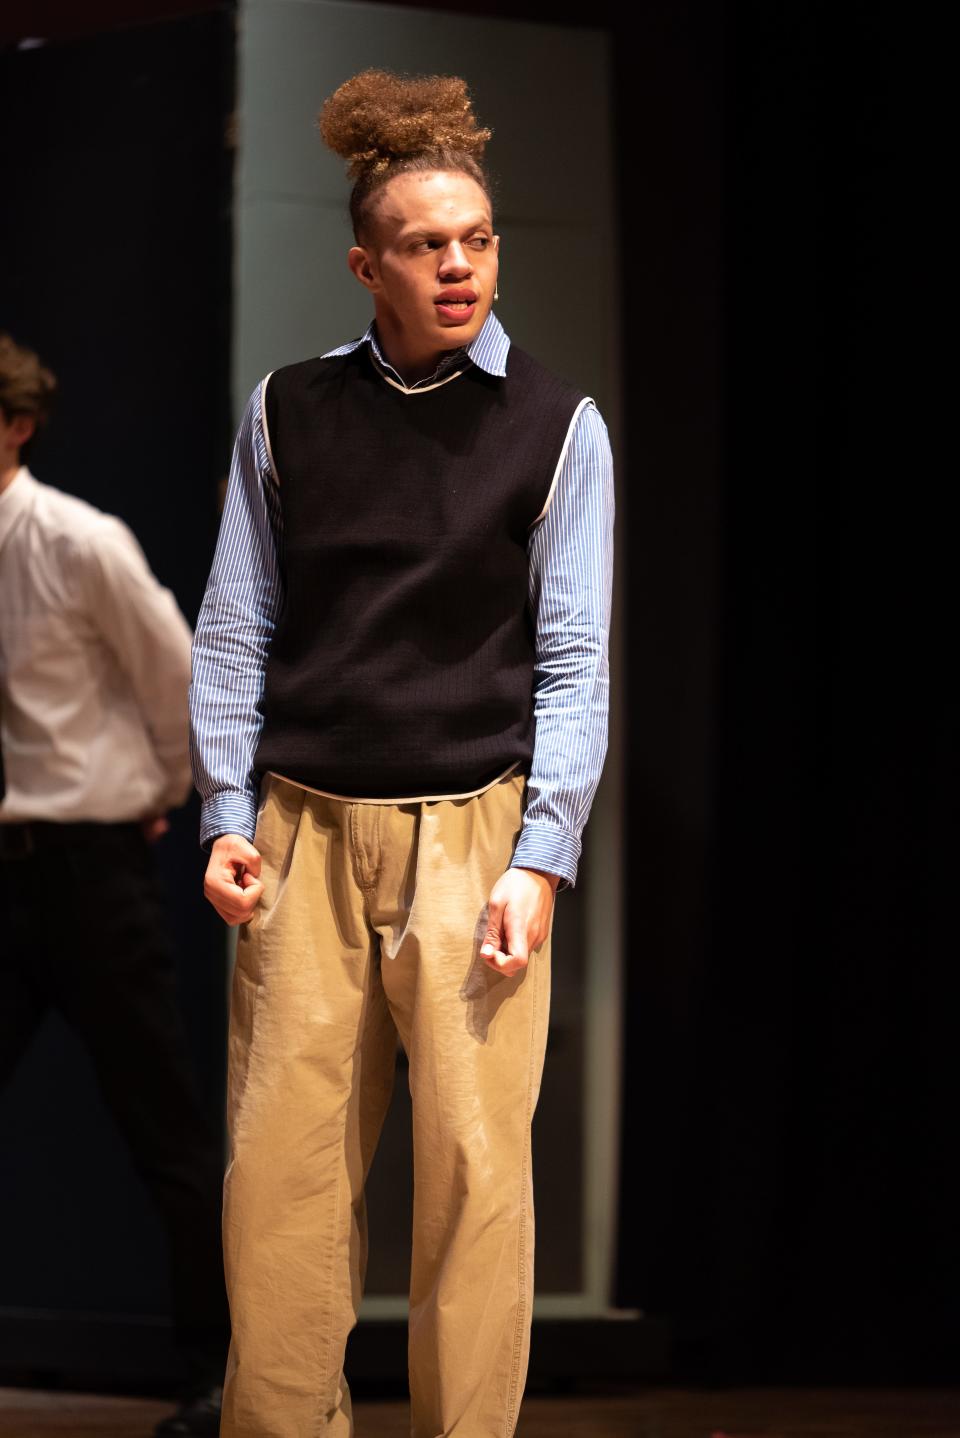 Beaver Falls senior Gio Clark, shown portraying the role of Mike (receiving a Mancini Nomination for Best Supporting Actor), will play the lead role of Ren McCormack in this year's production of "Footloose."